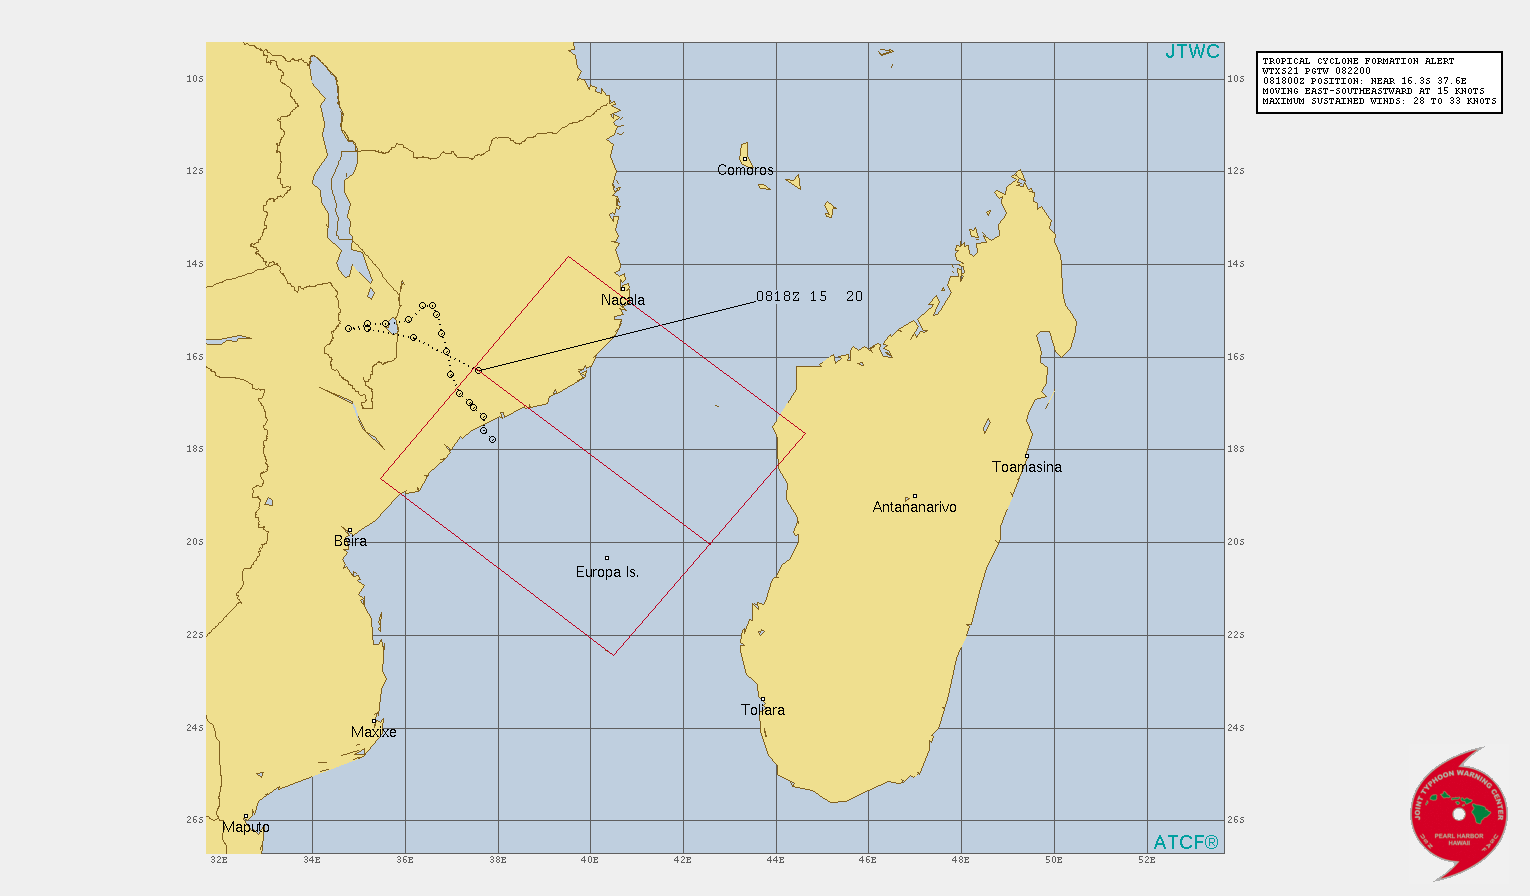 22UTC: 98S: Tropical Cyclone Formation Alert(TCFA) issued by the JTWC